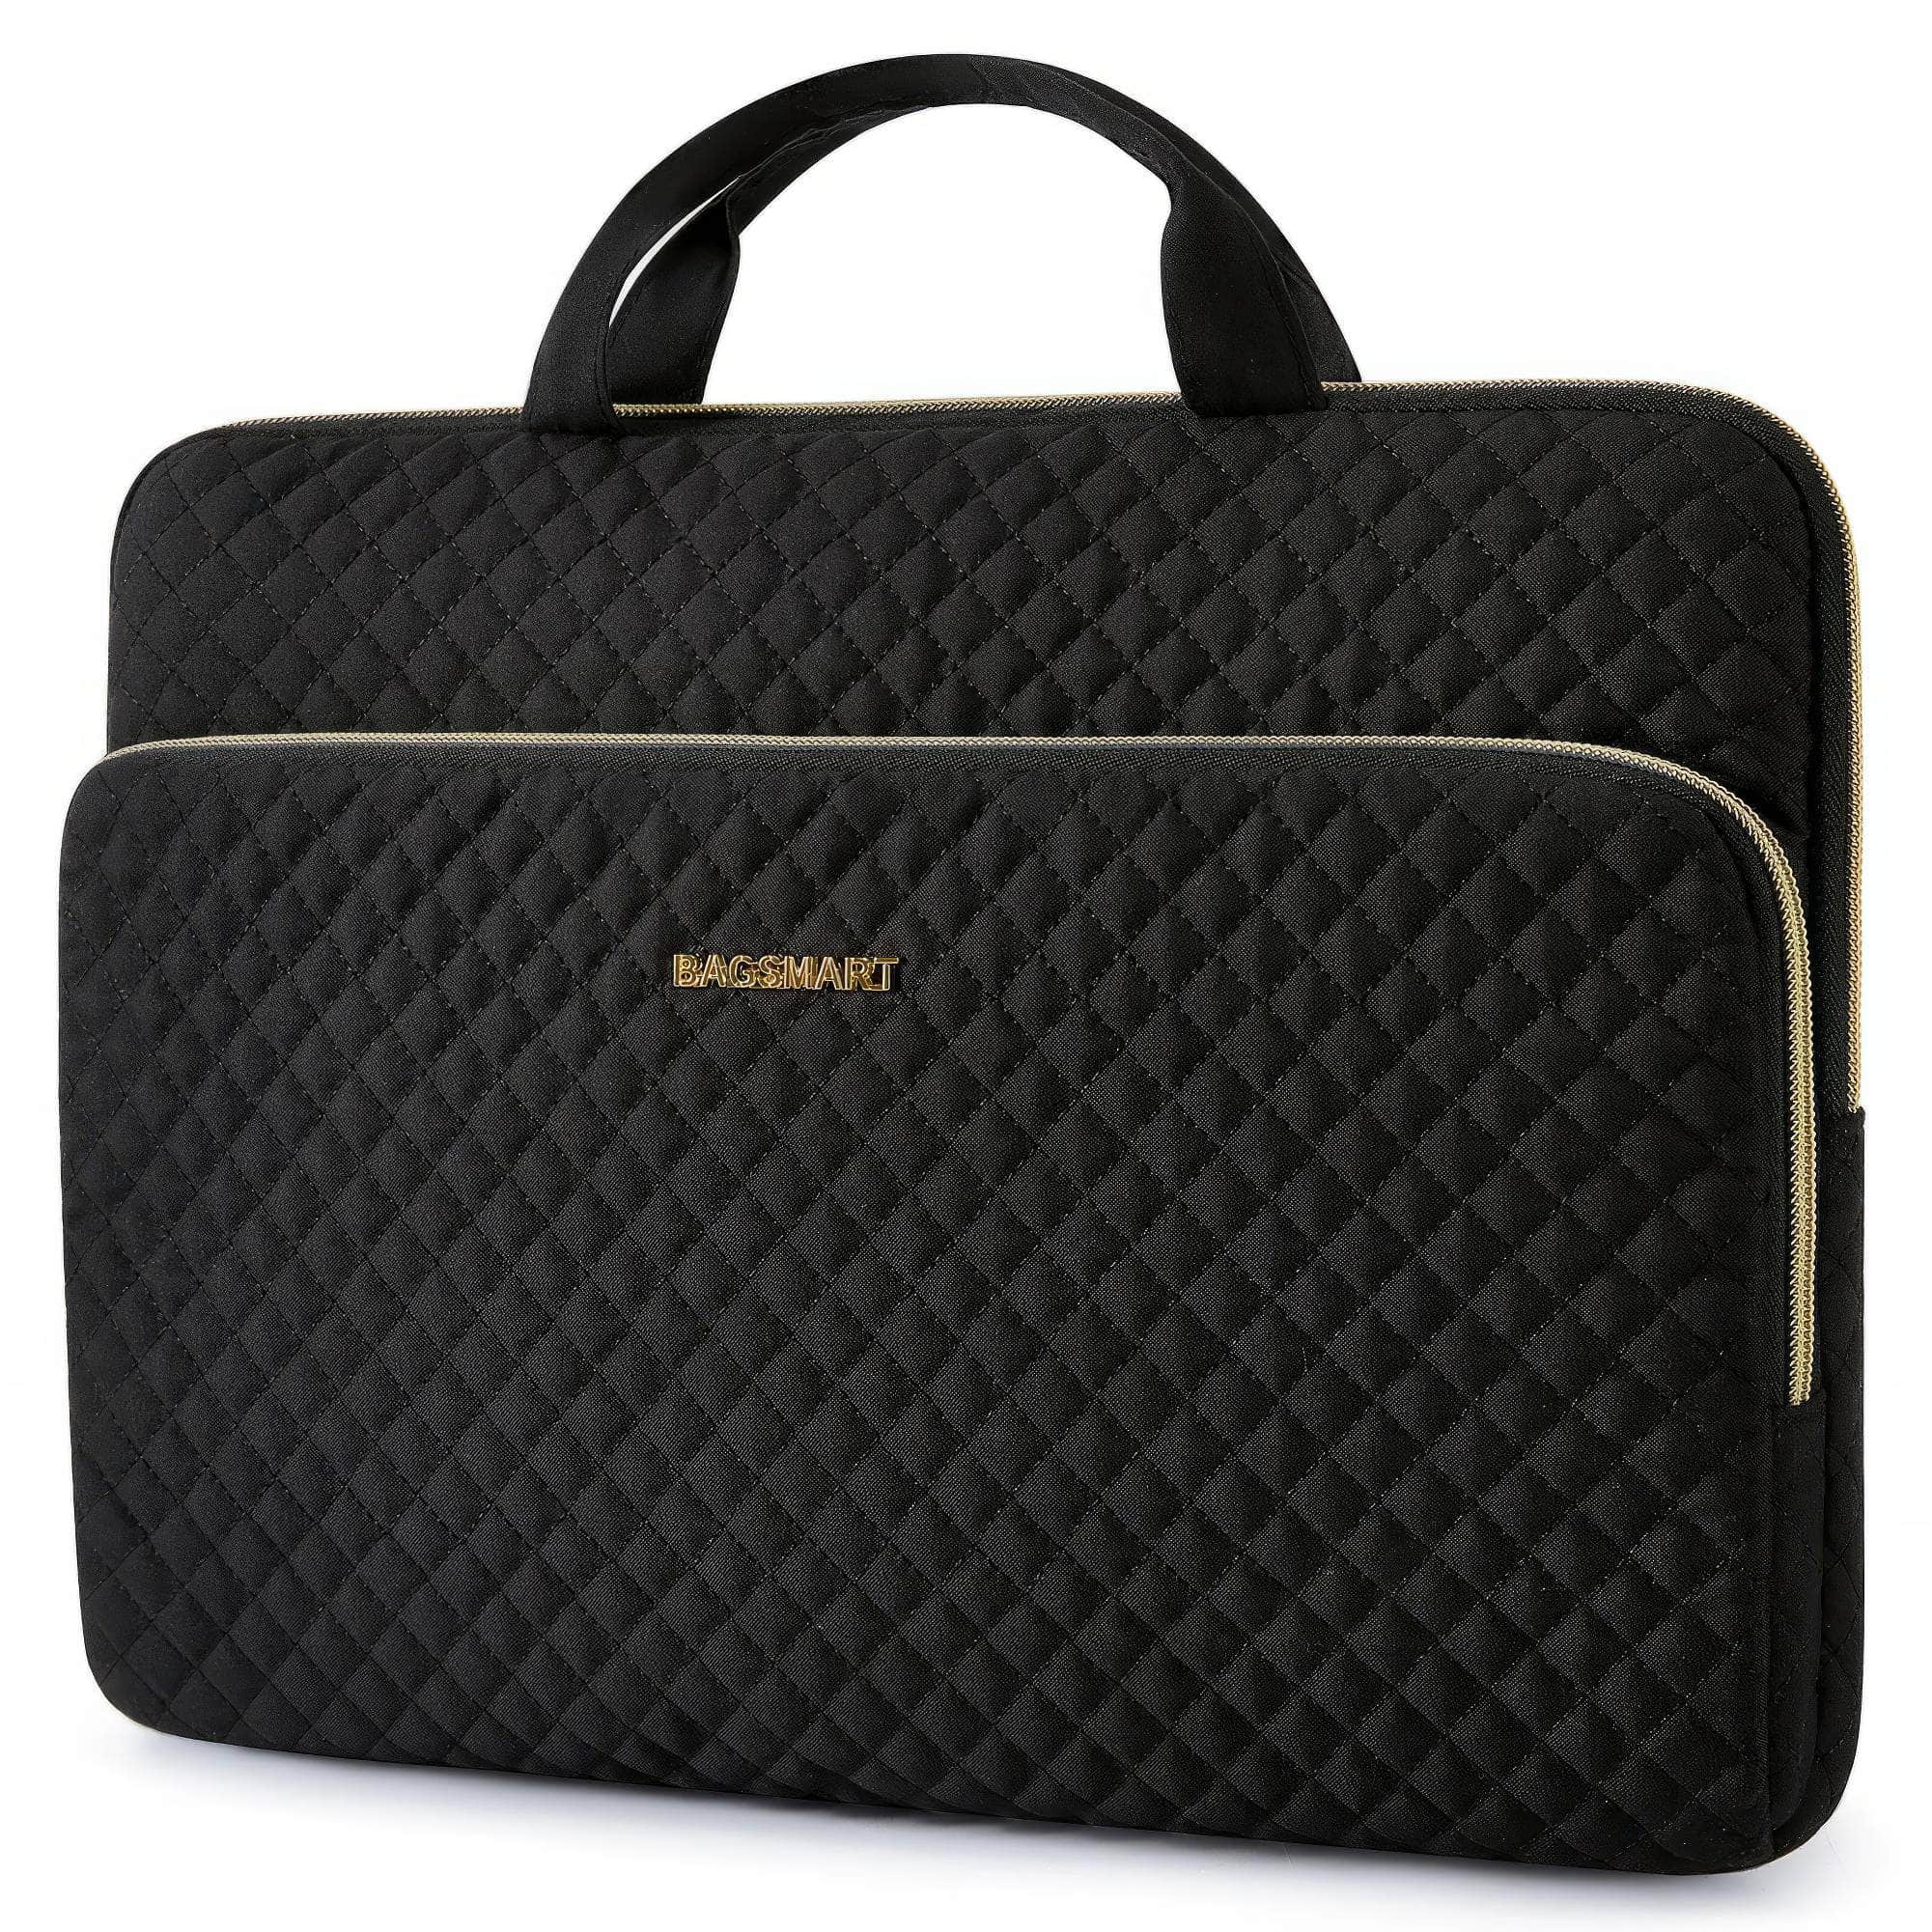 Laptop Bag for Women: Sleeve Case, Computer Handbag 13.3-15.6 inch, Briefcases for MacBook Air/Pro 13-14